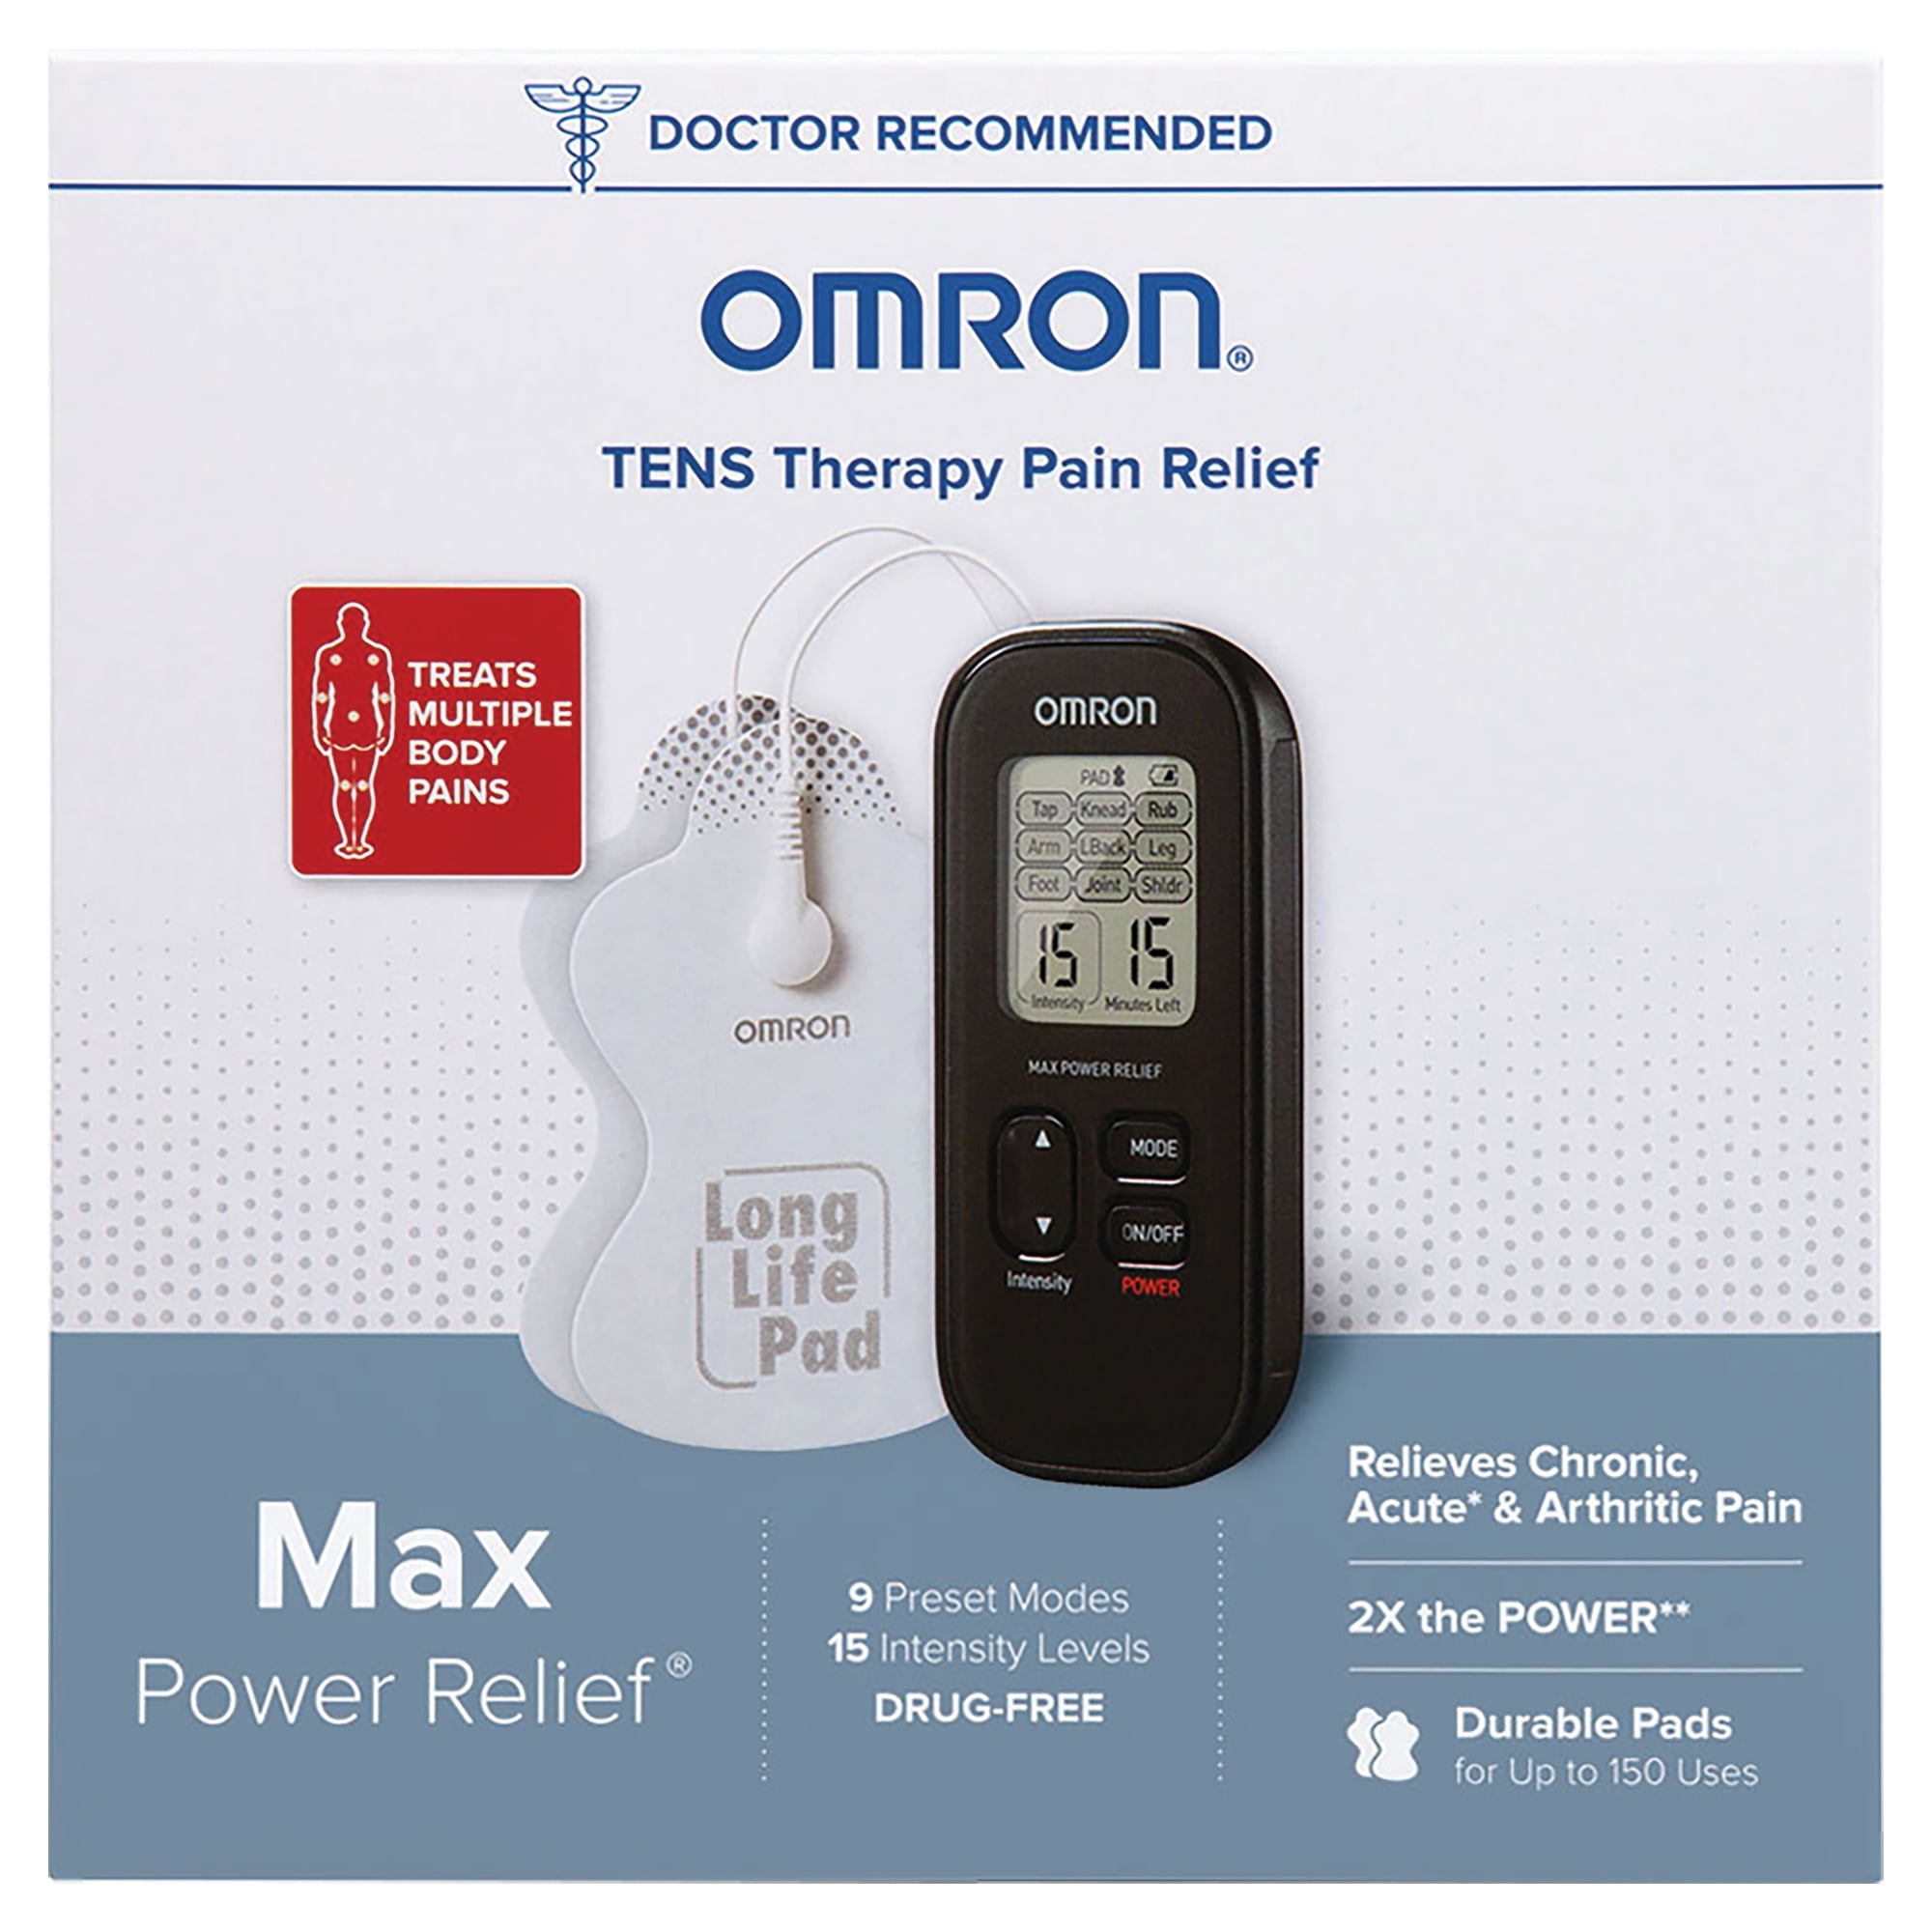 Omron Electrotherapy Max Power Pain Relief Unit PM3032 with Long